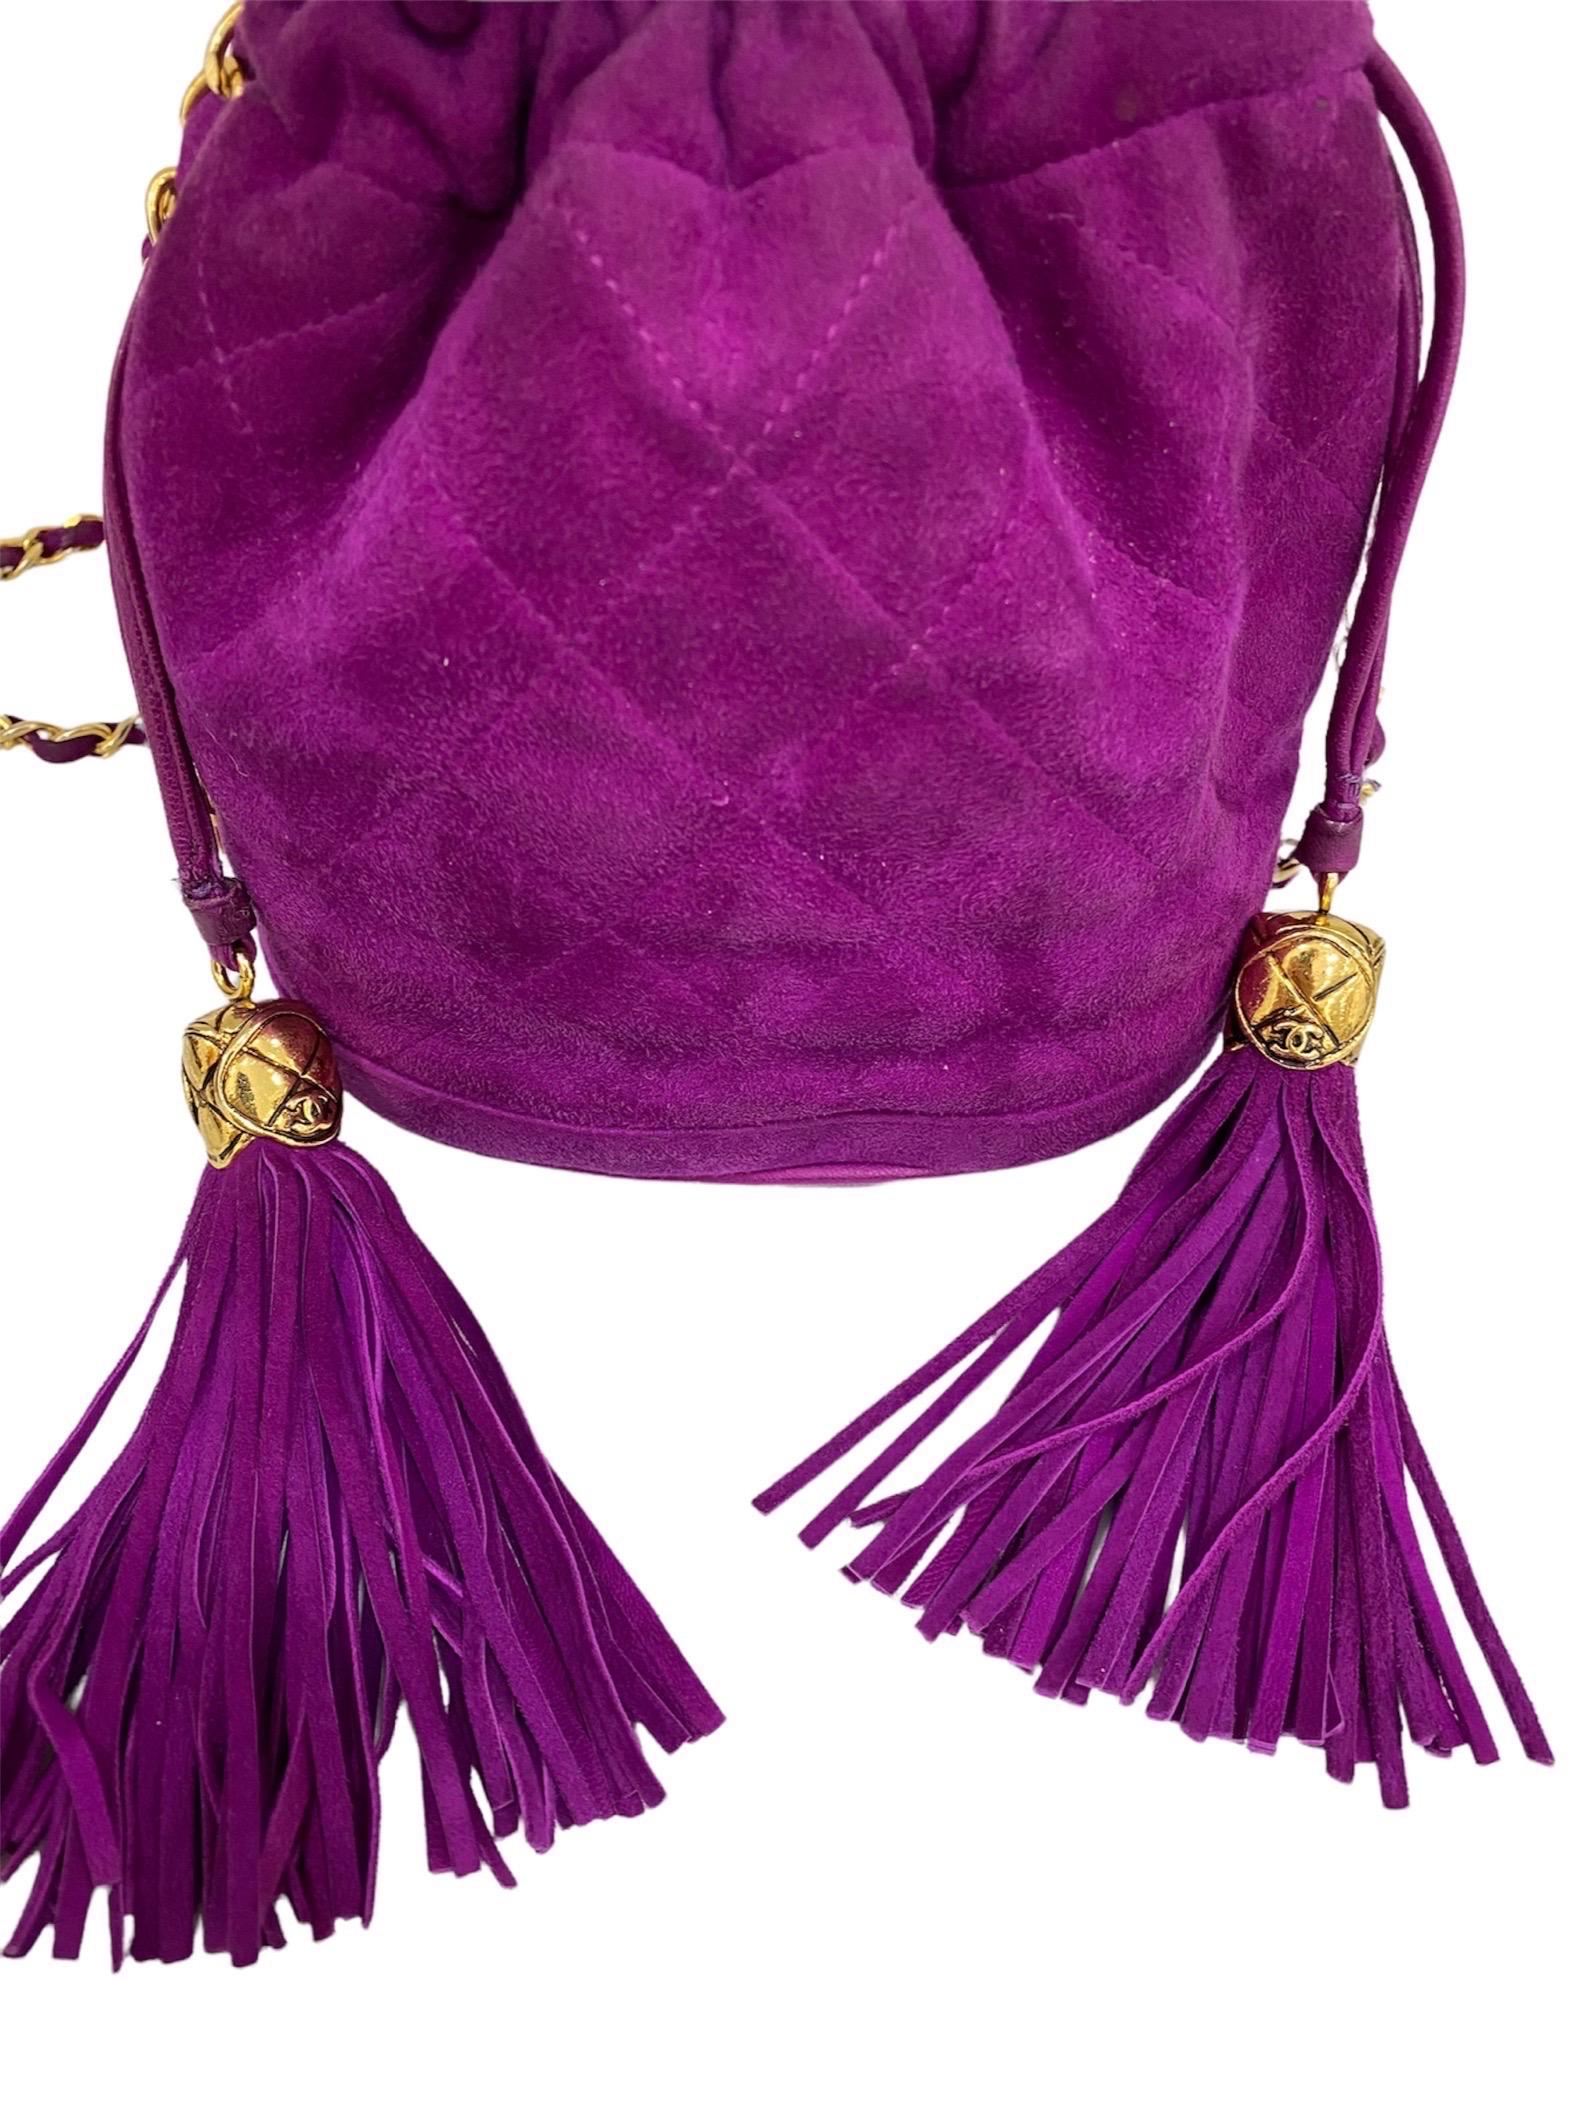 Bucket bag signed Chanel, made of purple suede with golden hardware.

Equipped with a lace closure, internally lined in black leather, roomy for the essentials.

Equipped with a woven leather and chain shoulder strap and an inside pocket with zip